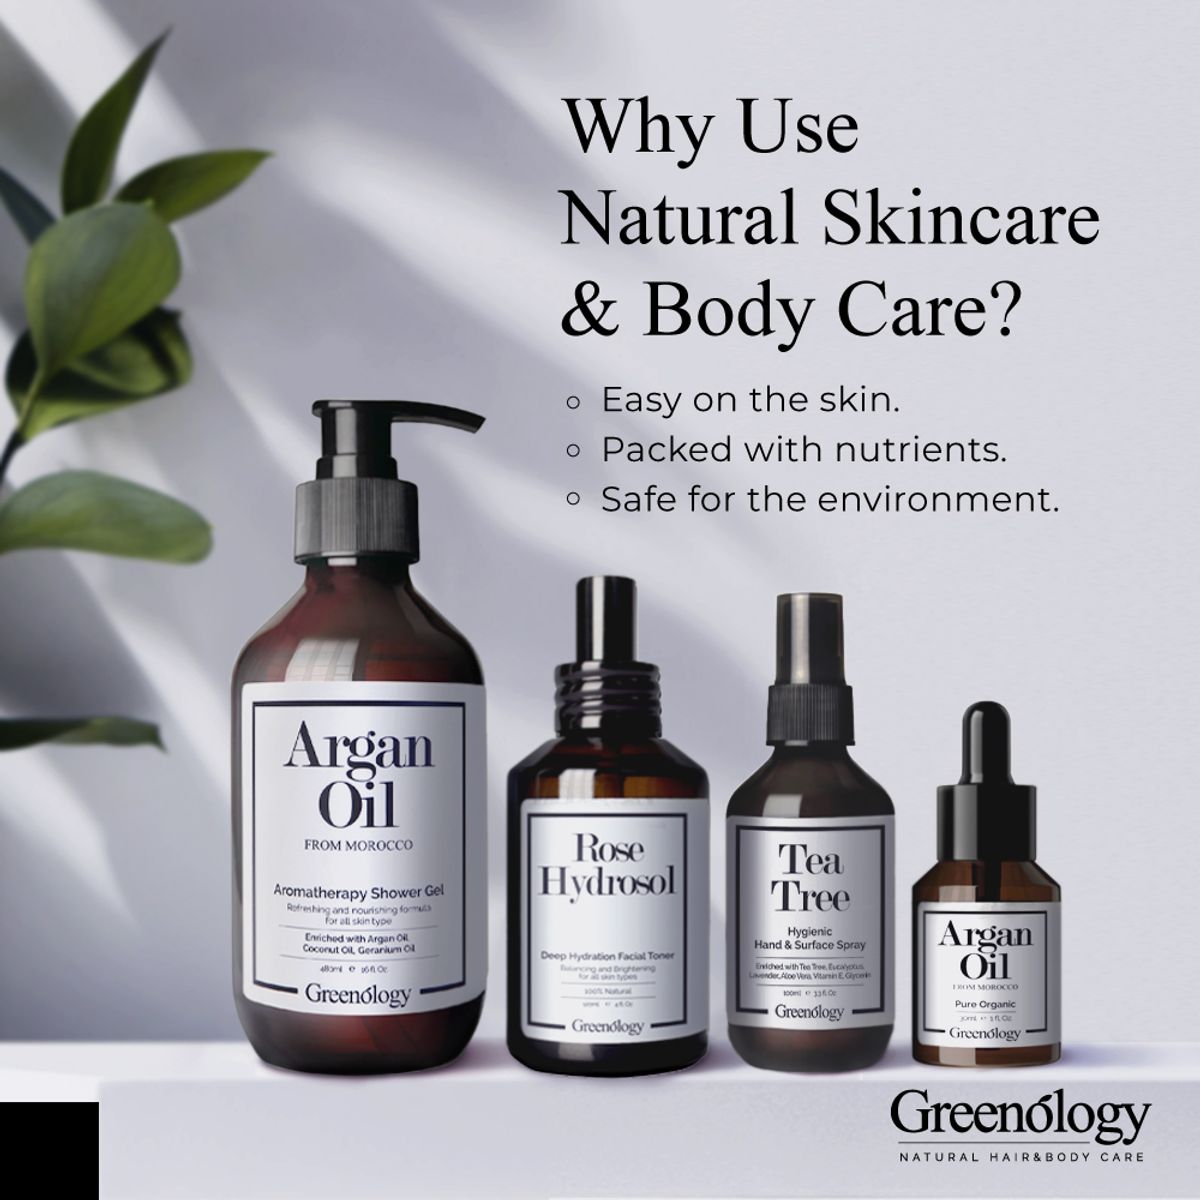 Why Use Natural Skincare & Body Care?